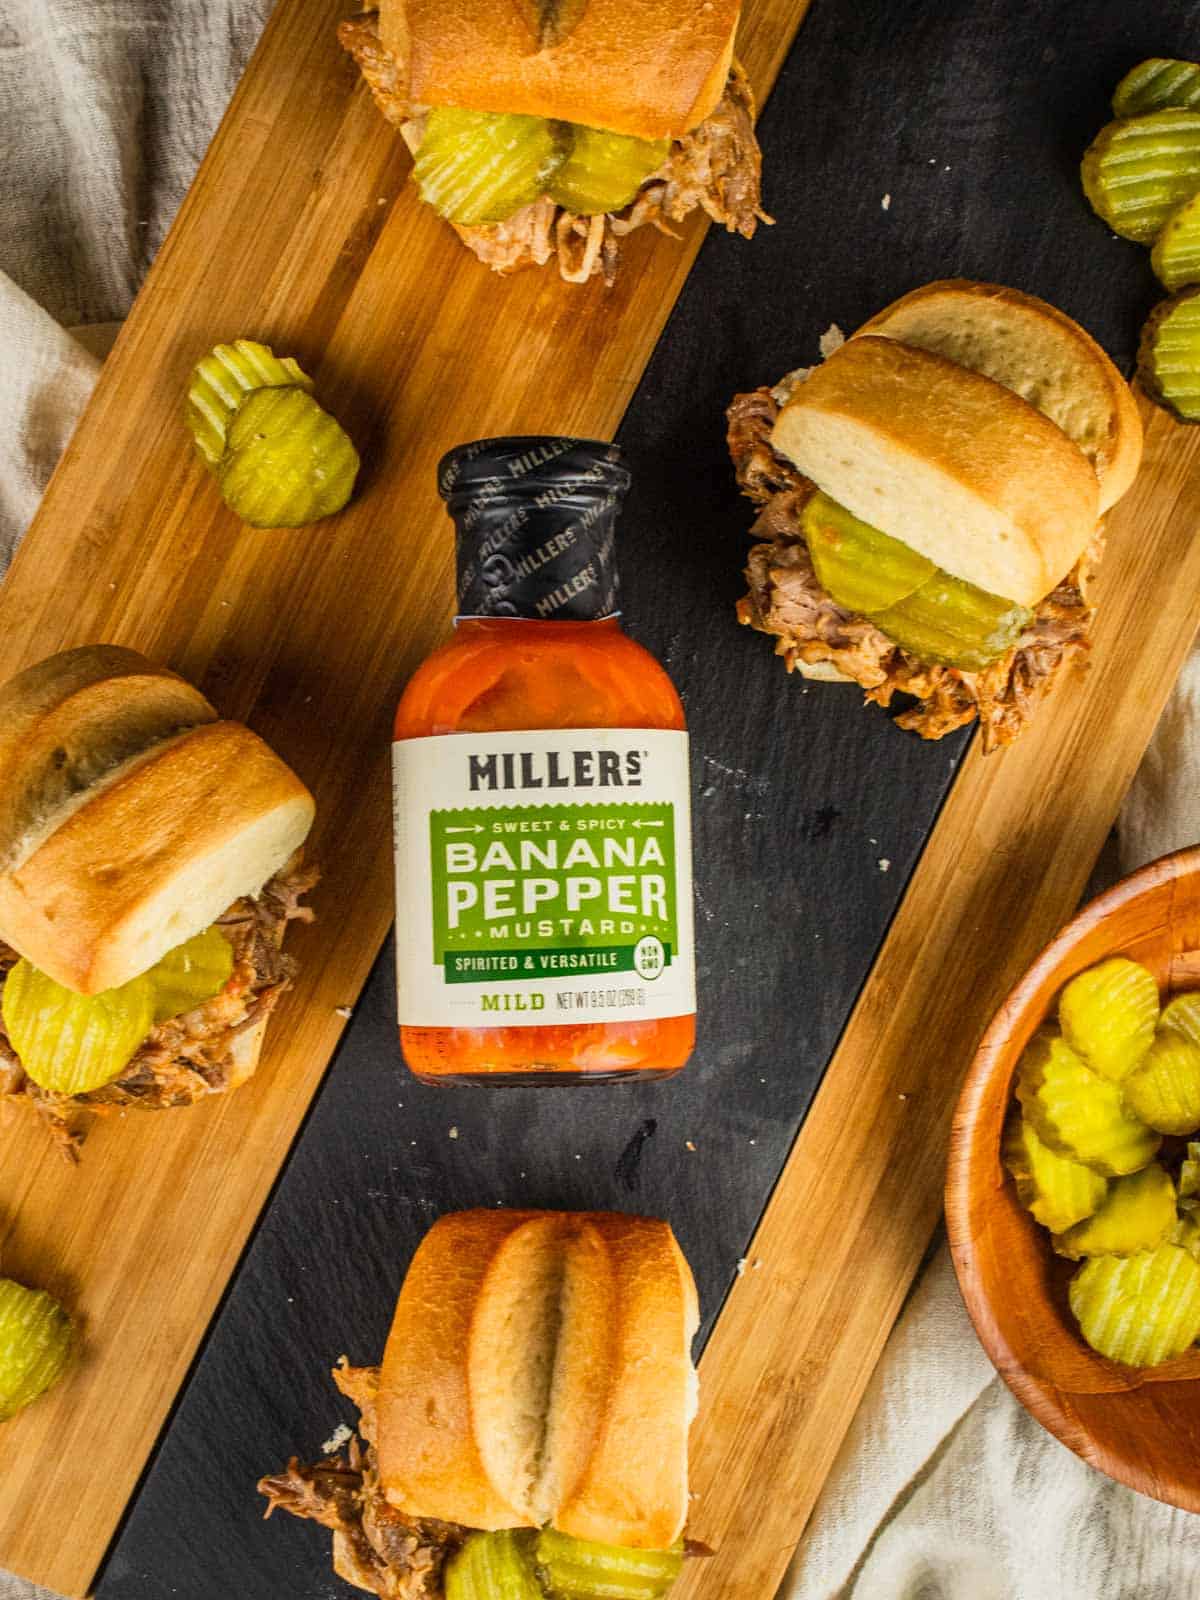 pulled pork on slider buns with pickles around a bottle of millers mustard on a cutting board